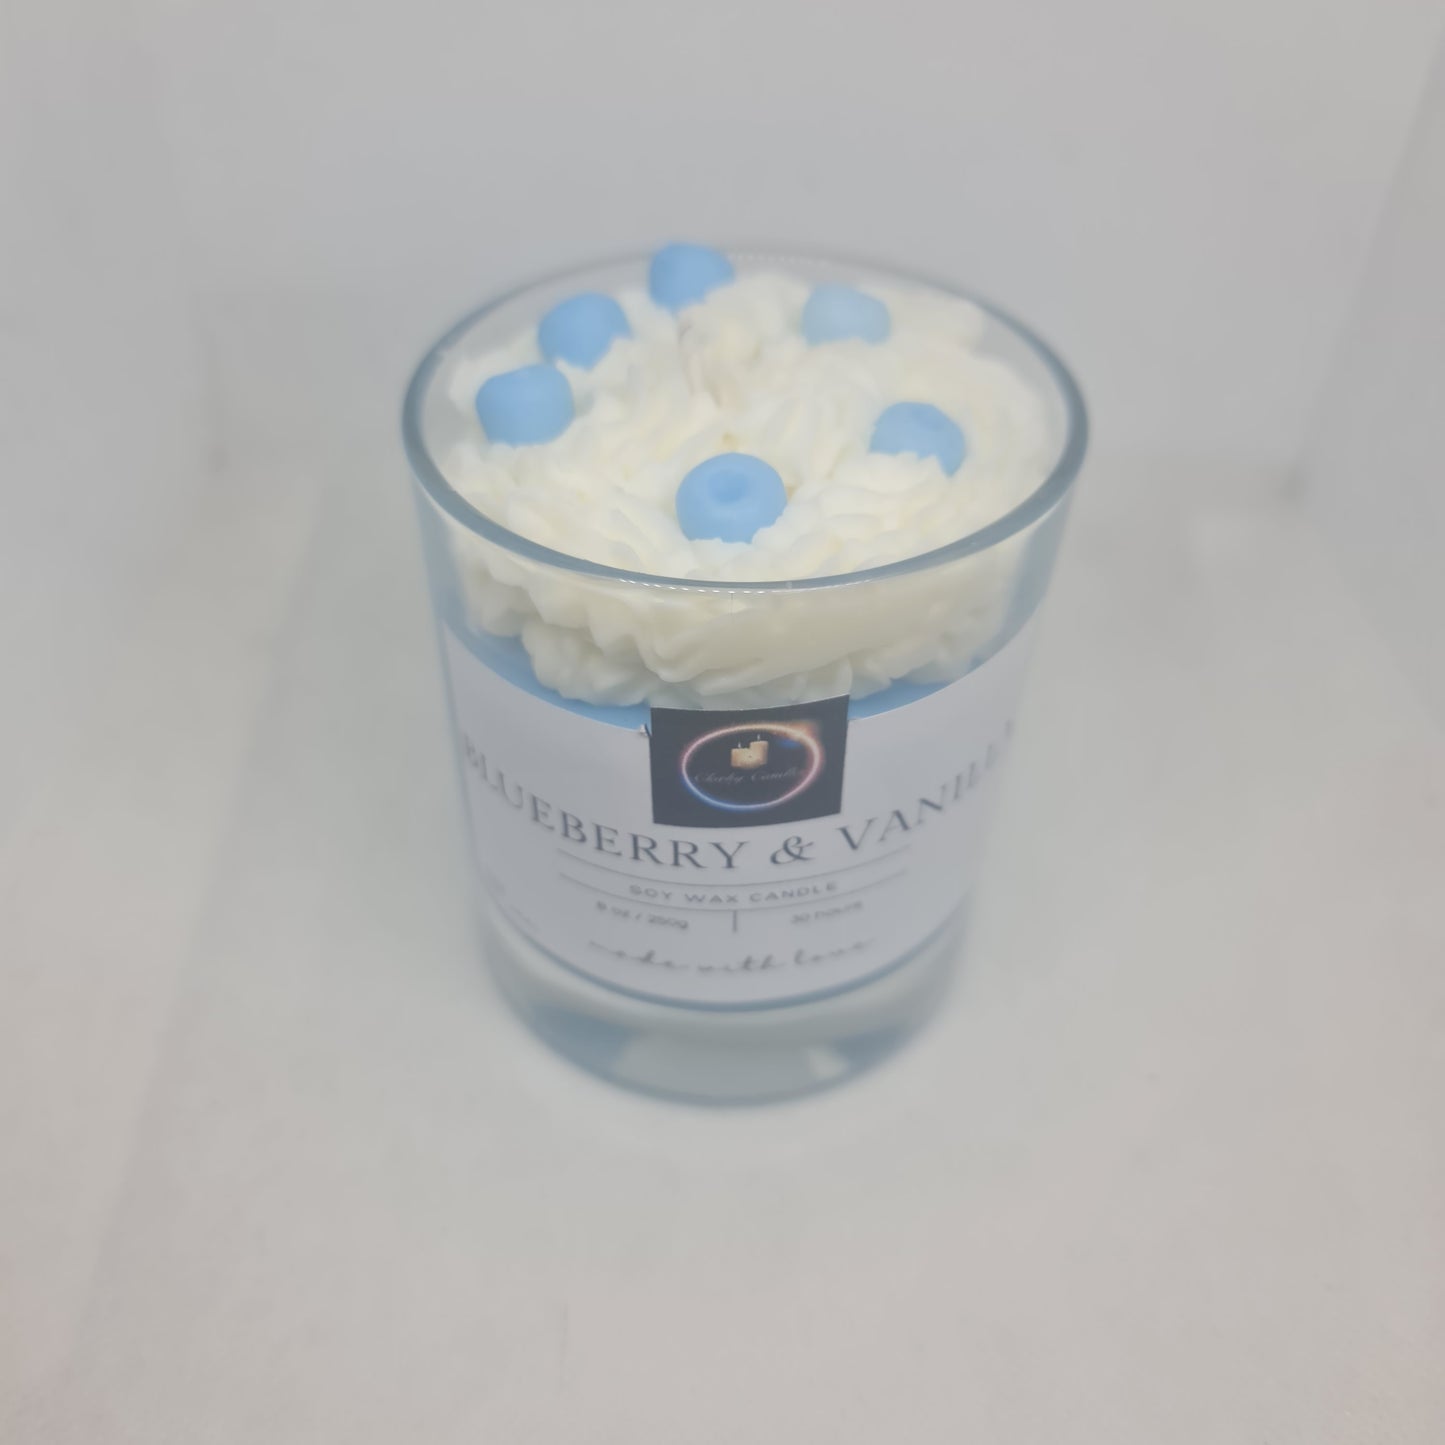 Blueberry & Vanilla  - Scented Soy Wax Candle